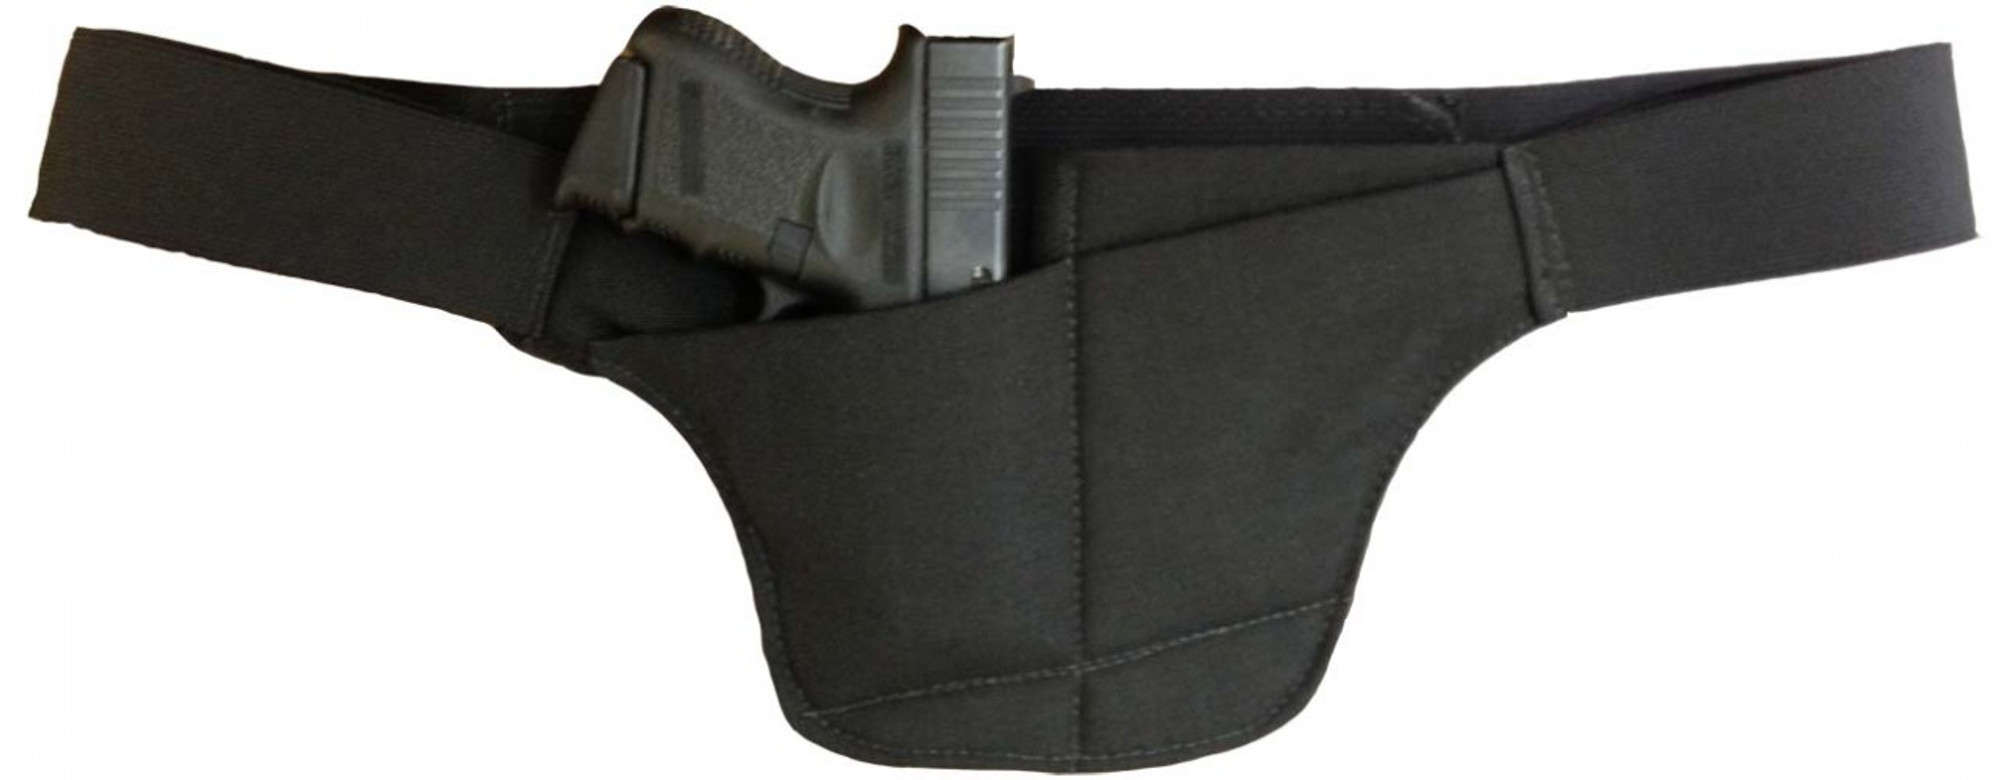 3. Pocket Holsters: Compact and Discreet Solutions for Deep Concealment